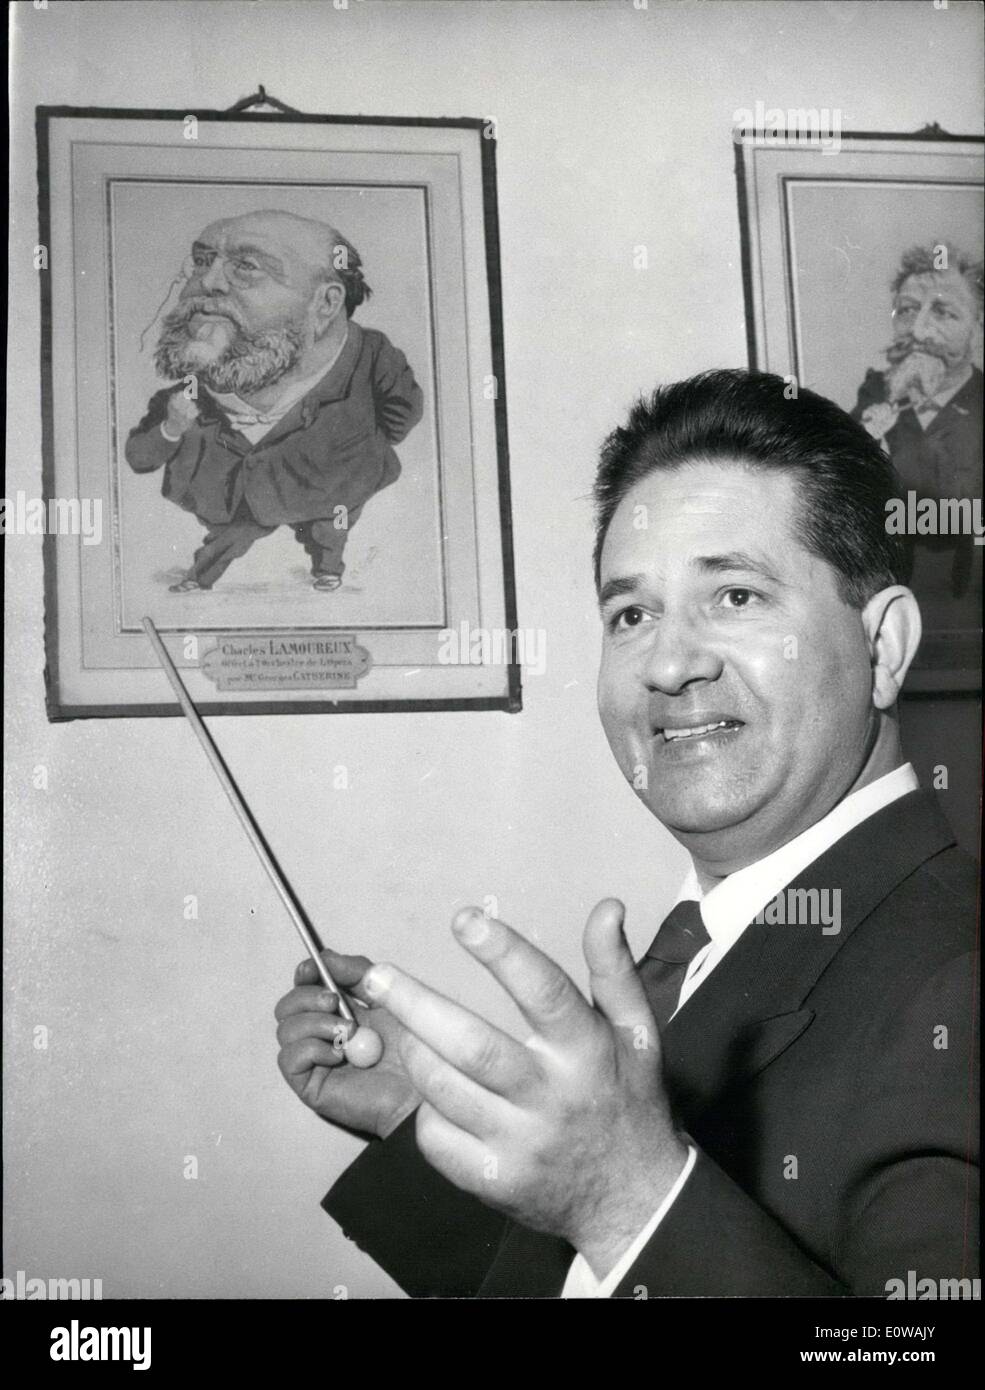 Mar. 26, 1962 - The new conductor of the Lamoureux Orchestra, Jean Baptiste Mari is pictured in front of a caricature of Charles Lamoureux, the orchestra's founder. Mari is from Algeria and was born in Palermo. At 50 years old, he is the son of a baker. He used to play the tuba solo in the Orchestra and replaced Charles Munch as conductor in America. Stock Photo